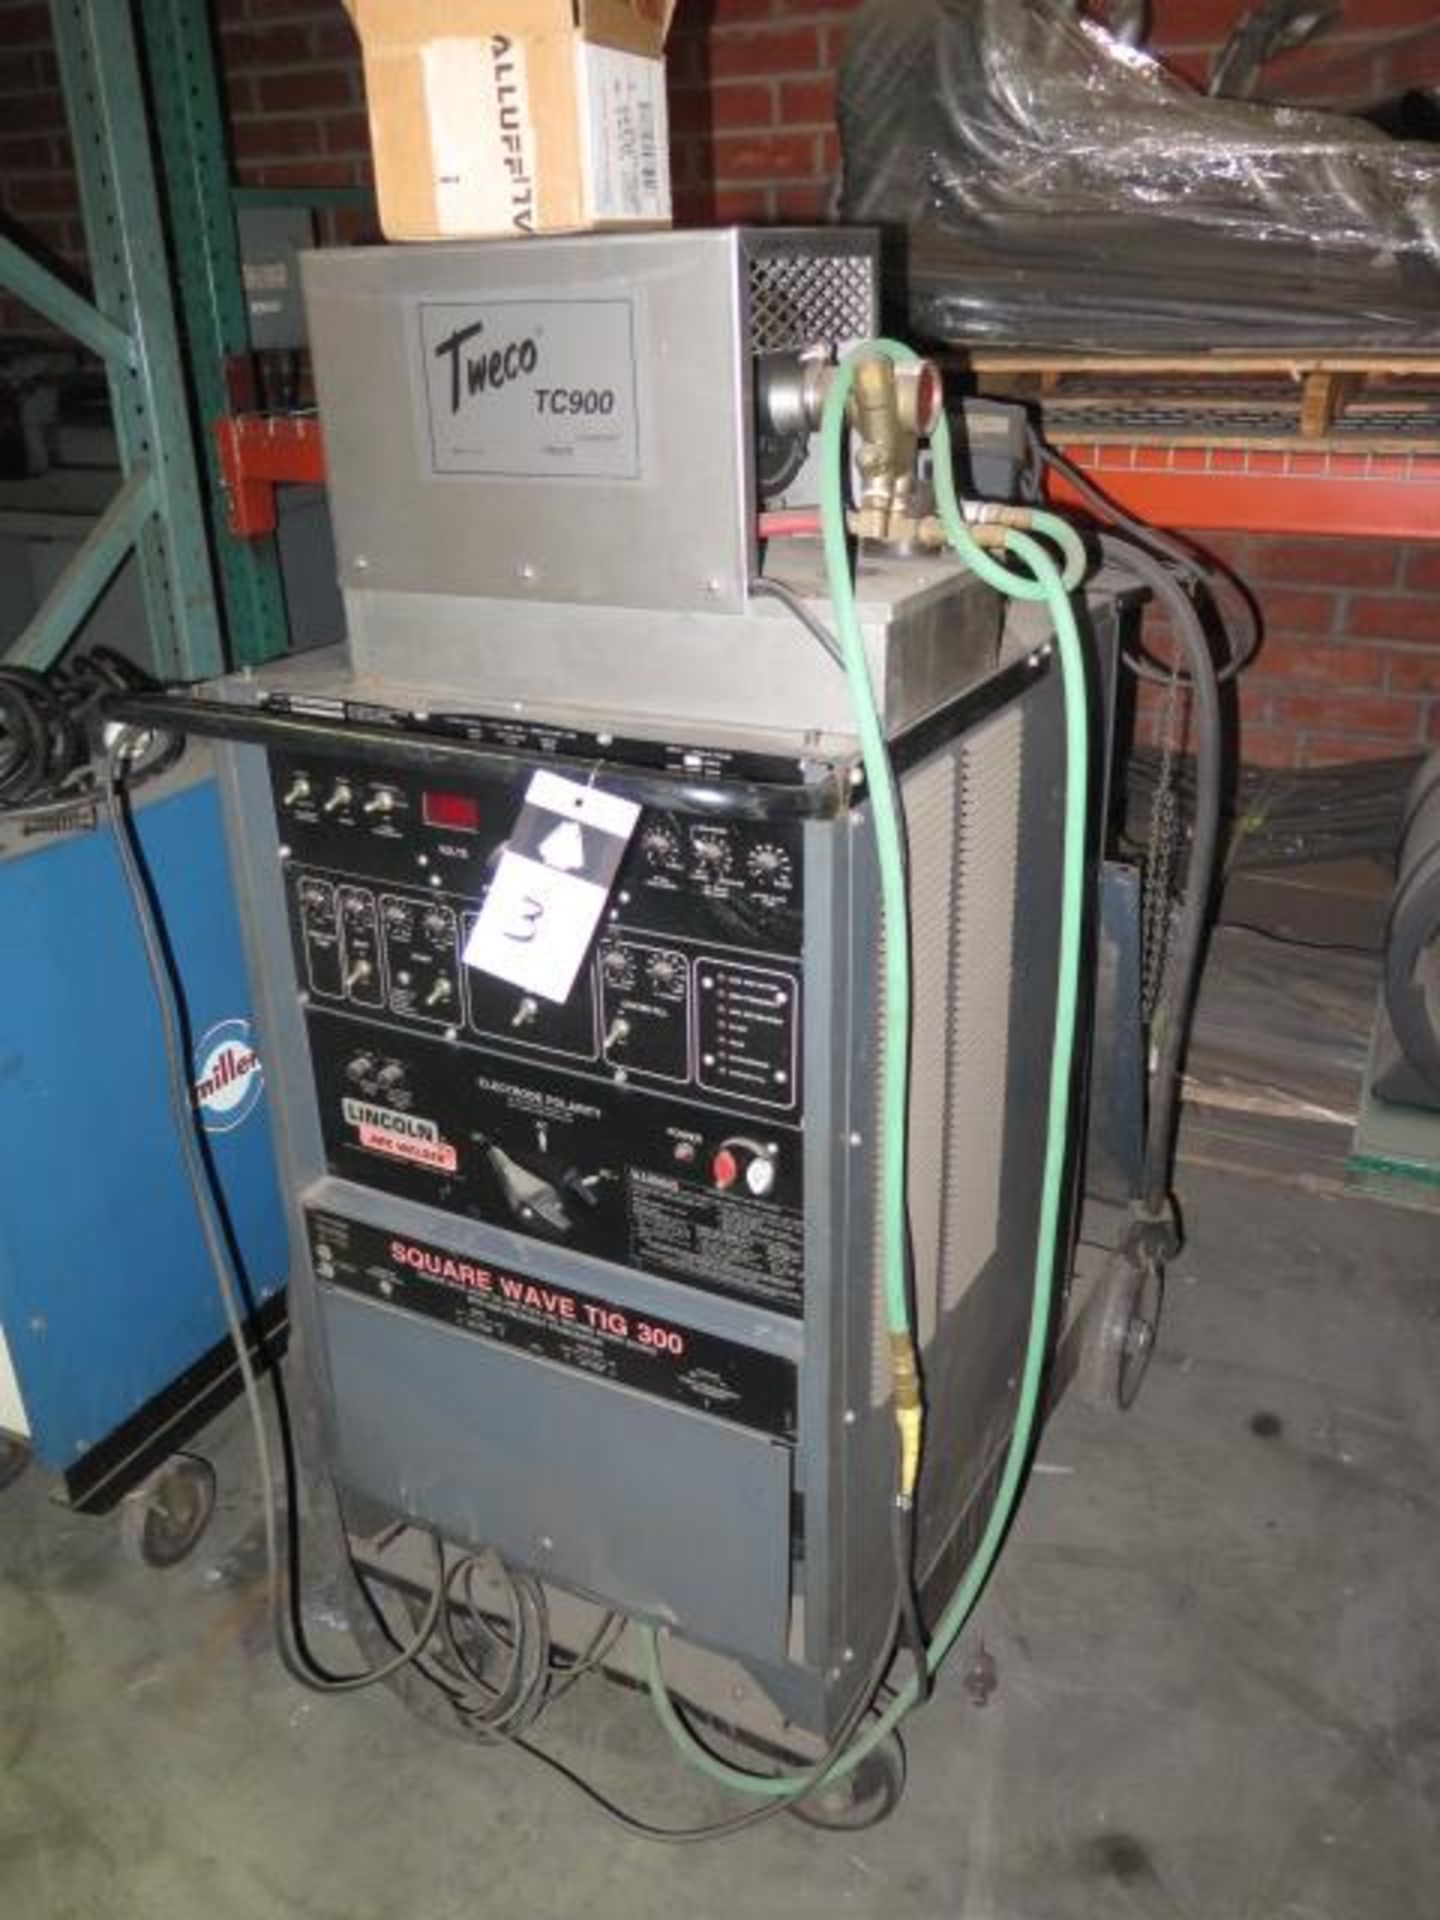 Lincoln Square Wave TIG300 Squarewave AC/DC TIG & Stick Welding Power Source s/n AC662425,SOLD AS IS - Image 2 of 6